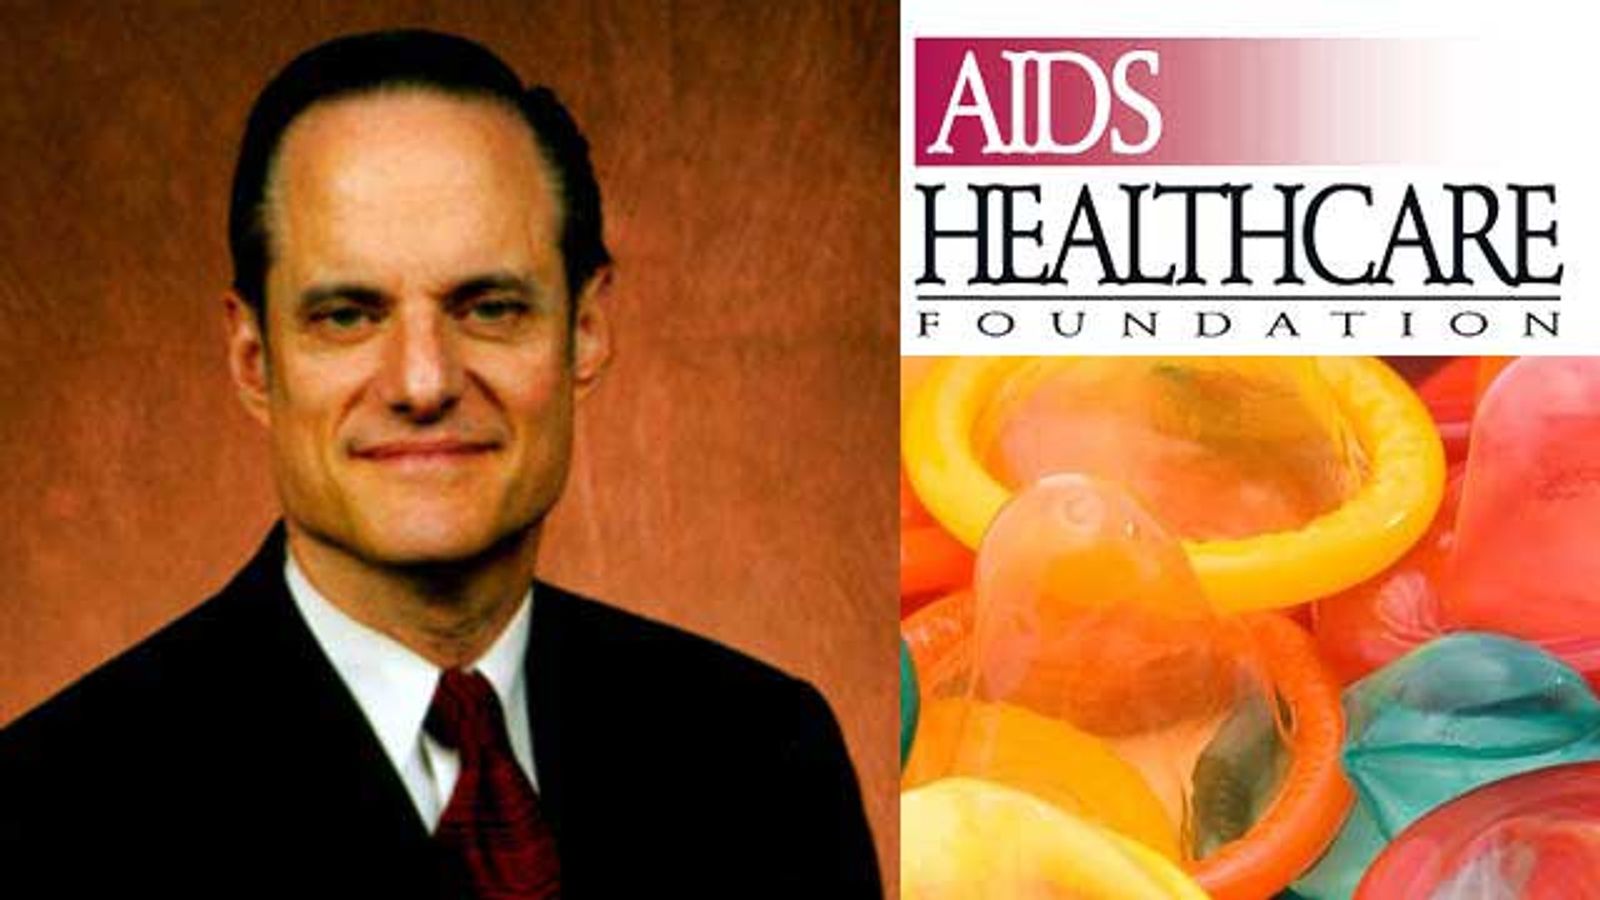 Op-Ed: An Open Letter to AIDS Healthcare Foundation